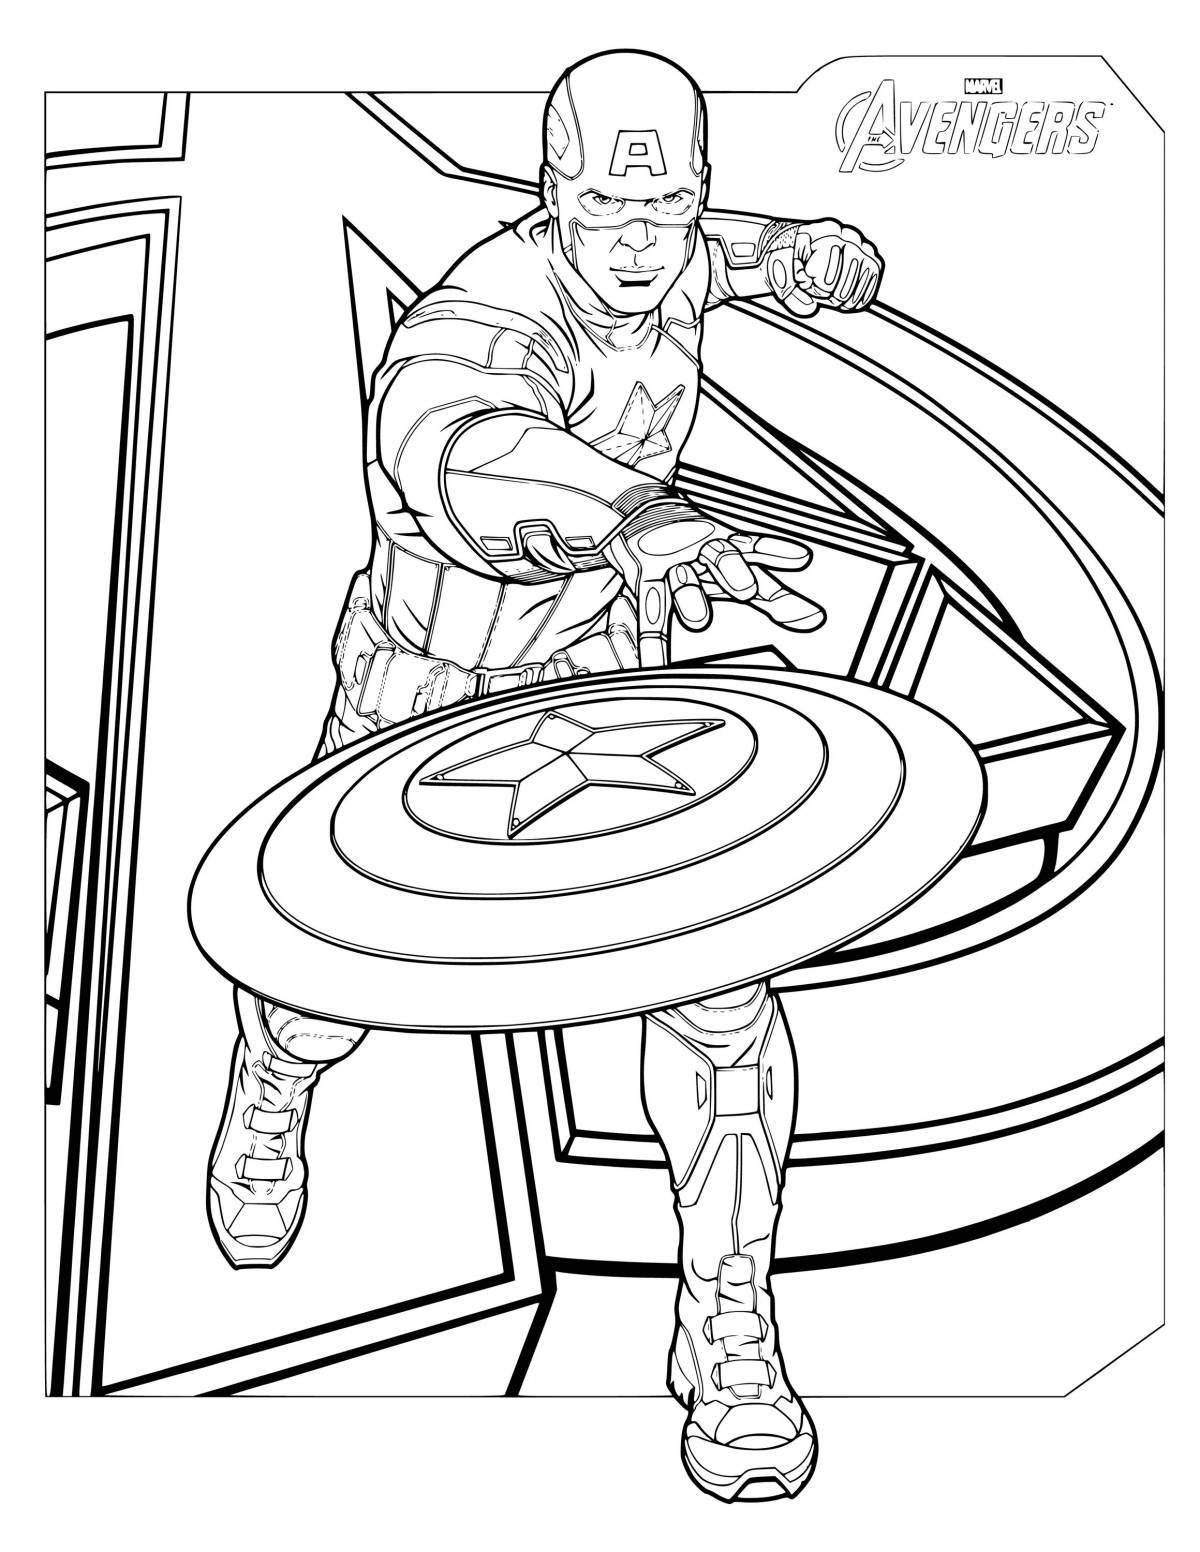 Captain America coloring page for boys